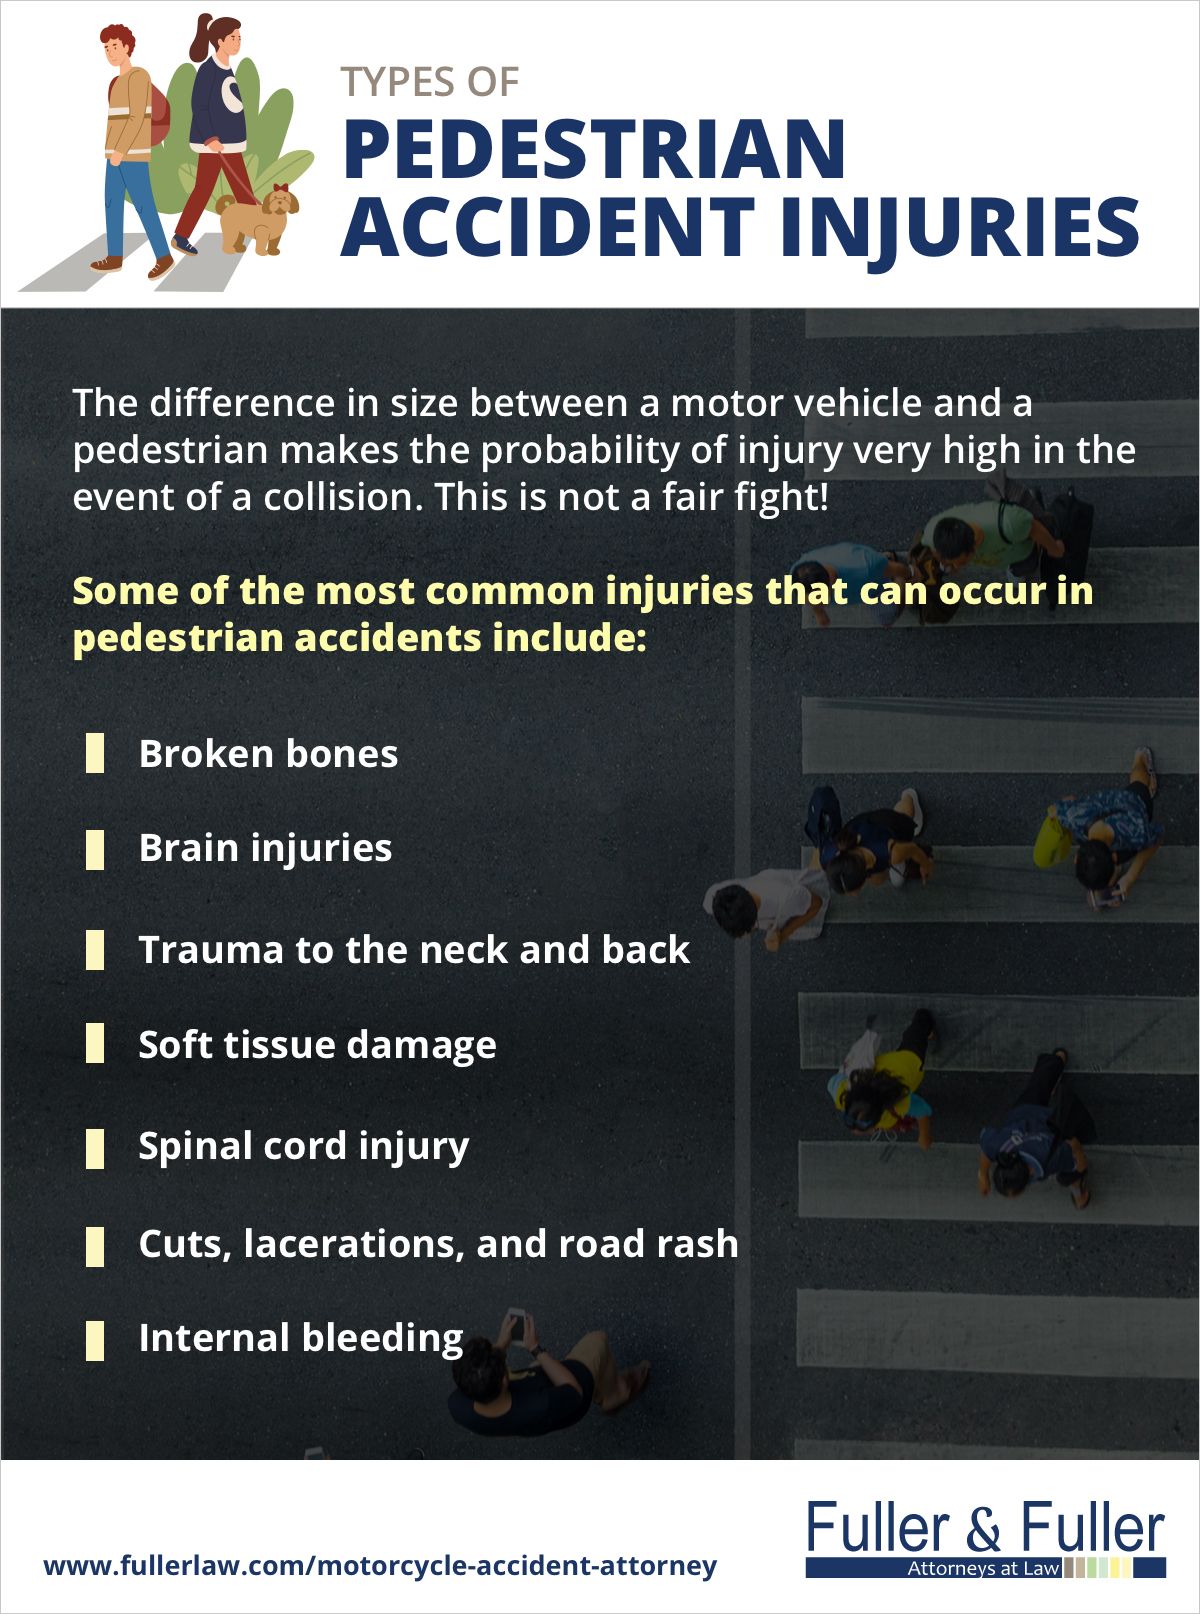 Types of Pedestrian Accident Injuries